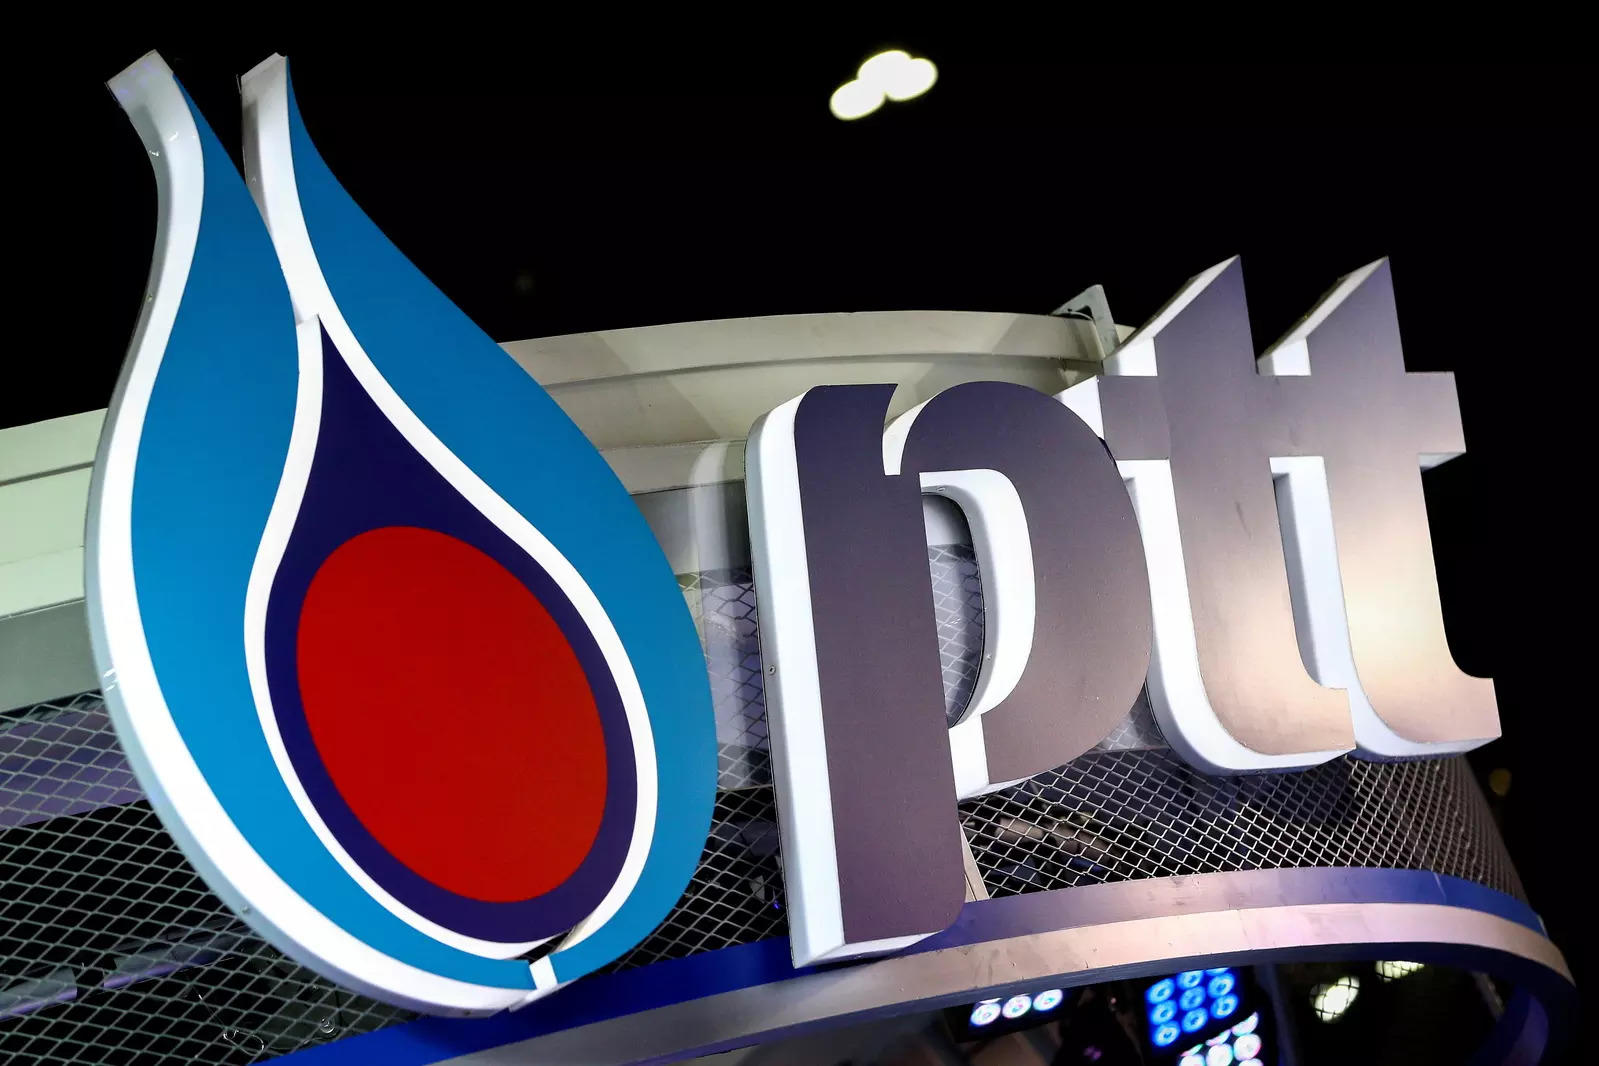 PTT also targets 9 million tonnes of liquefied natural gas per year and reach 8 GW of electricity from conventional sources by 2030. It plans to have at least 30% of net income from new energy and business sources like EV, life science and logistics by 2030, Auttapol said.